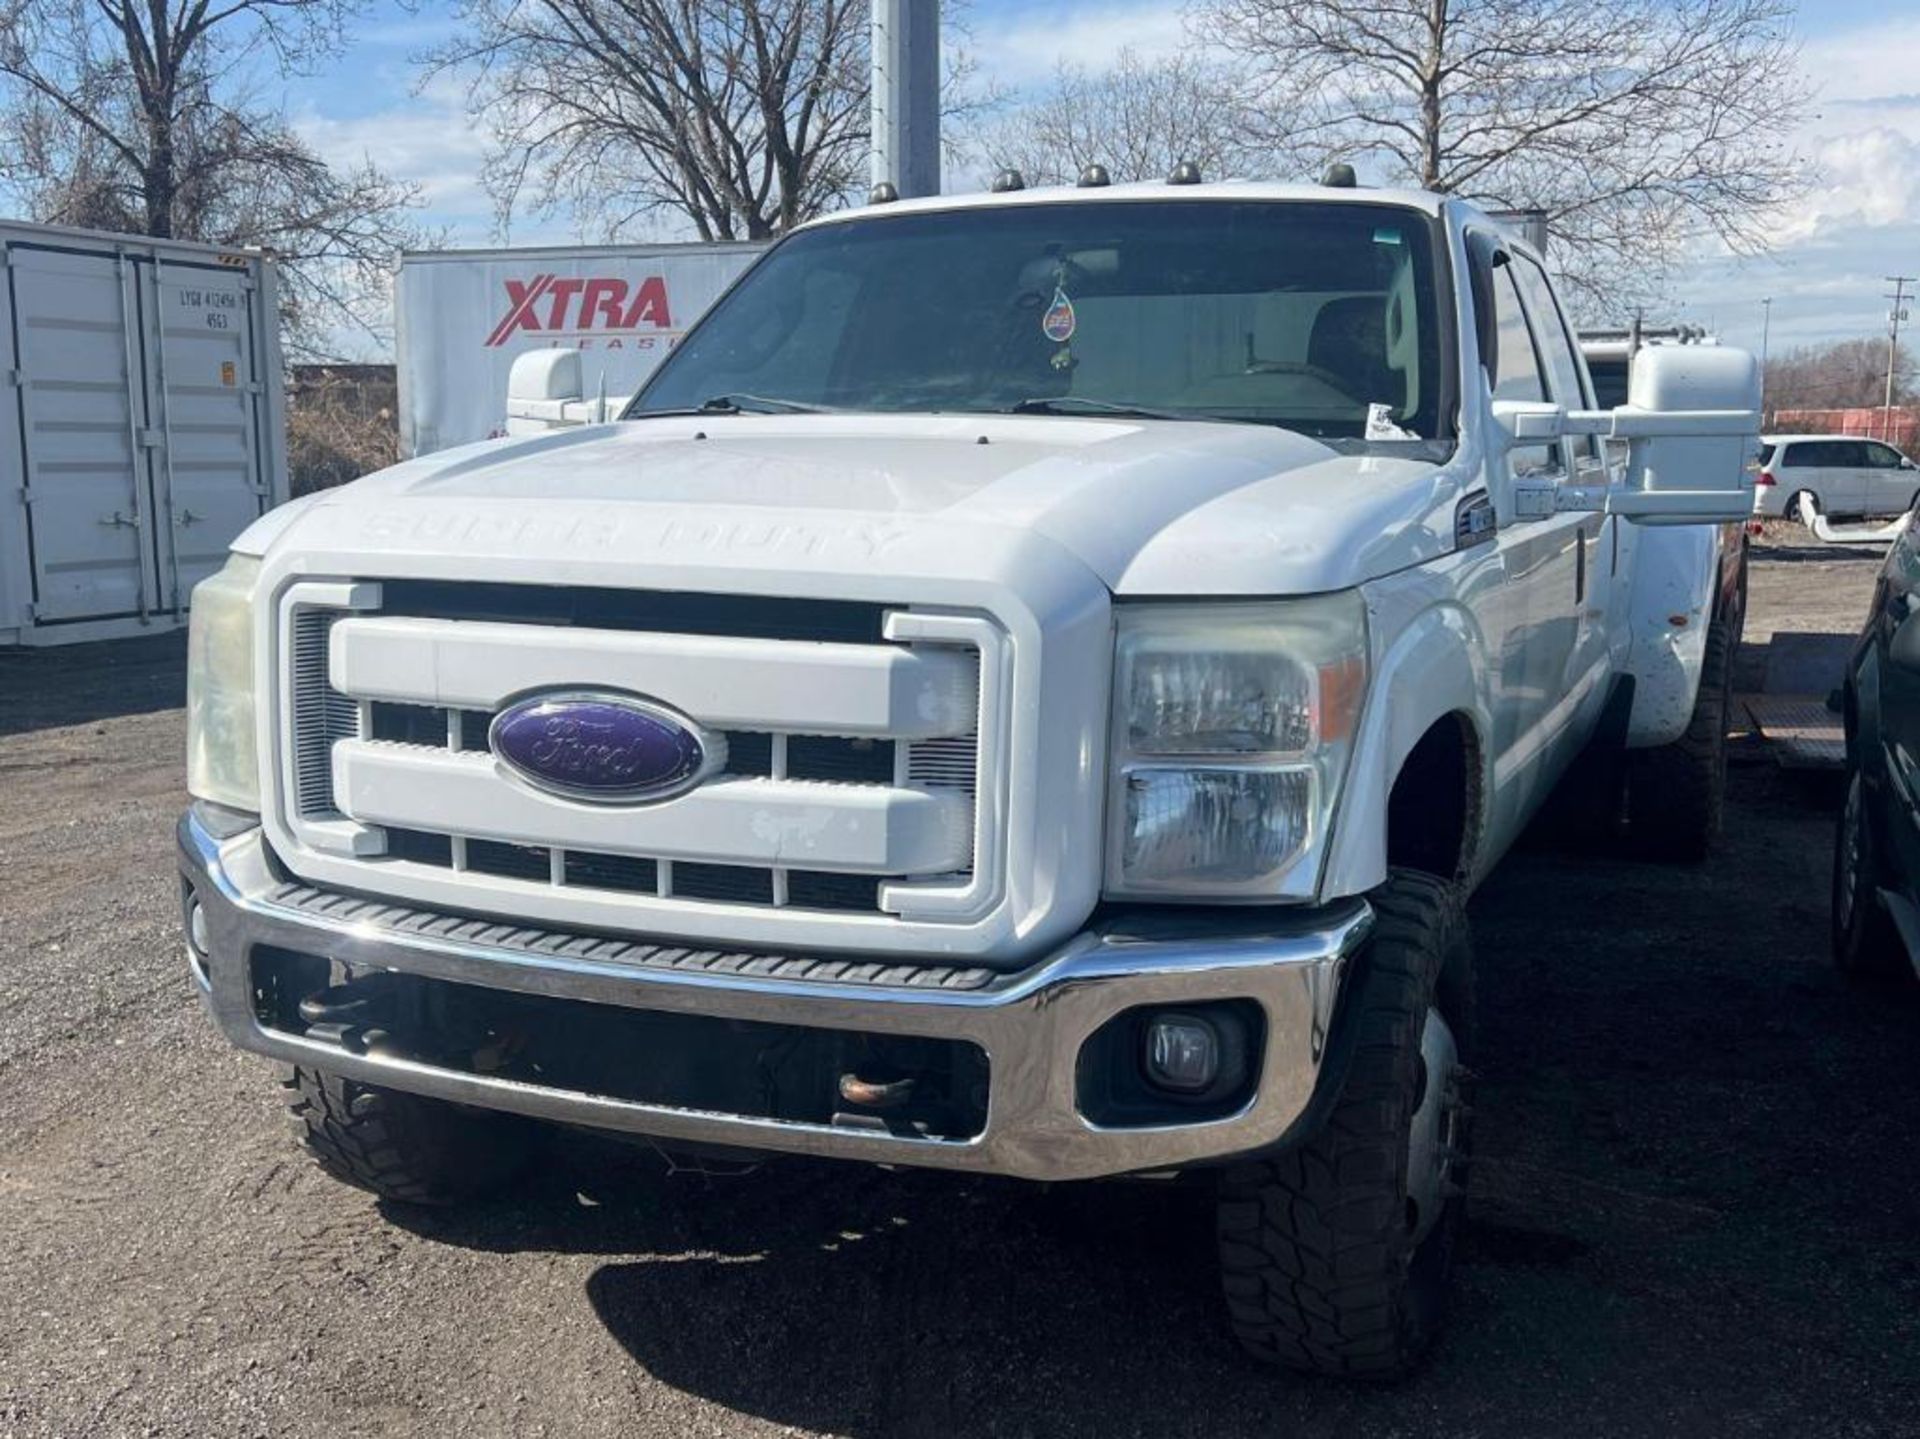 2013 Ford F-350 Dually Pickup - Image 2 of 7